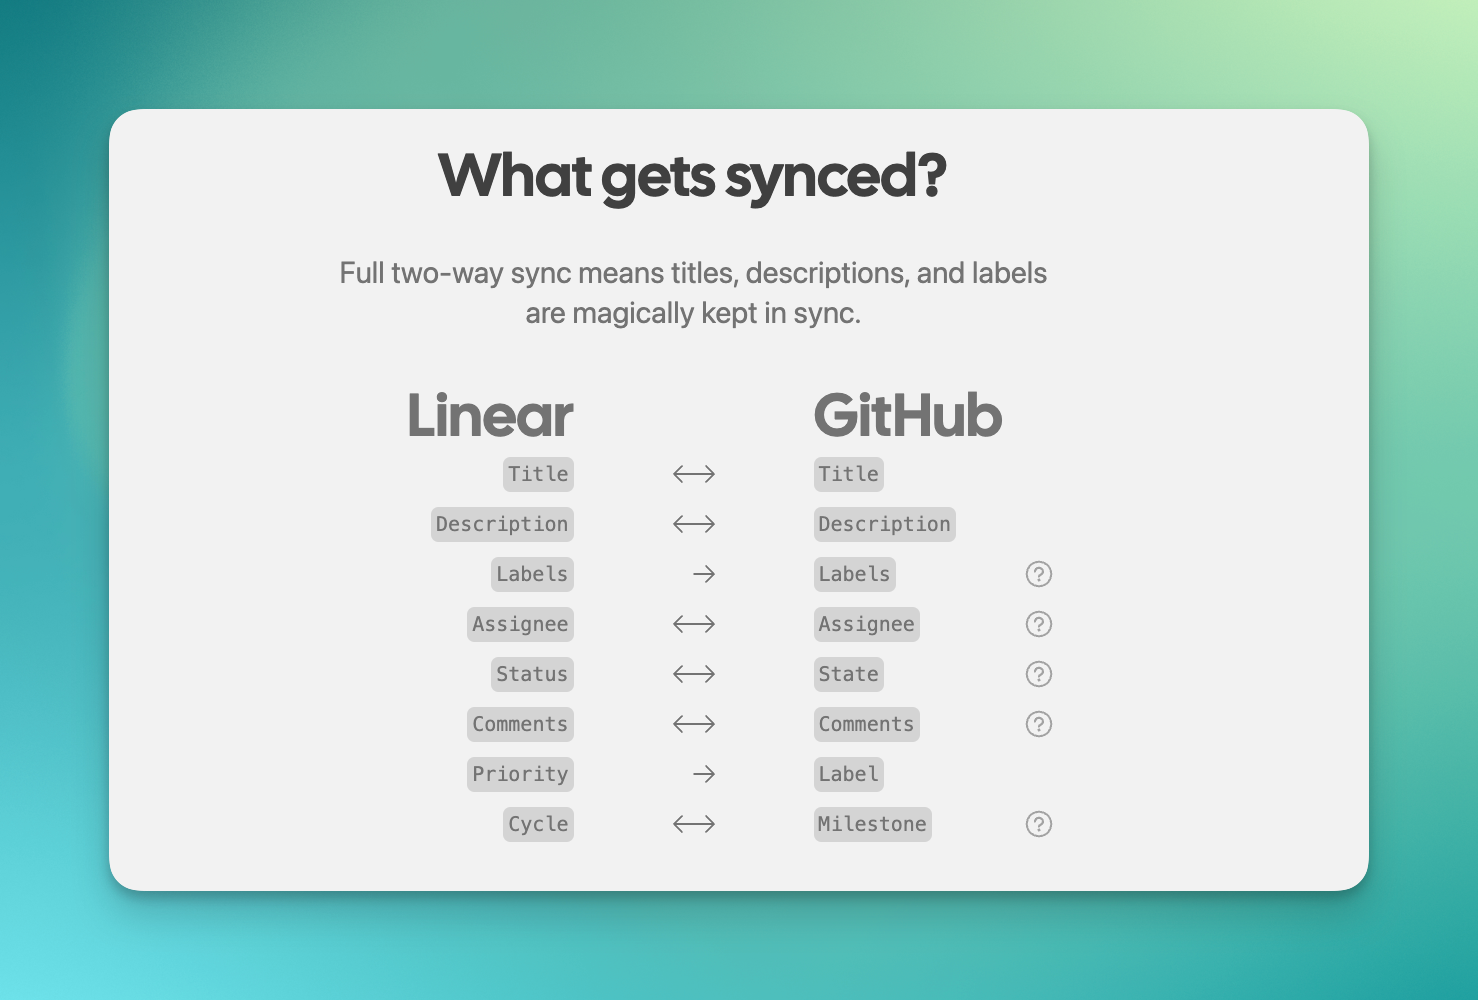 Table showing properties that get synced between Linear and Github